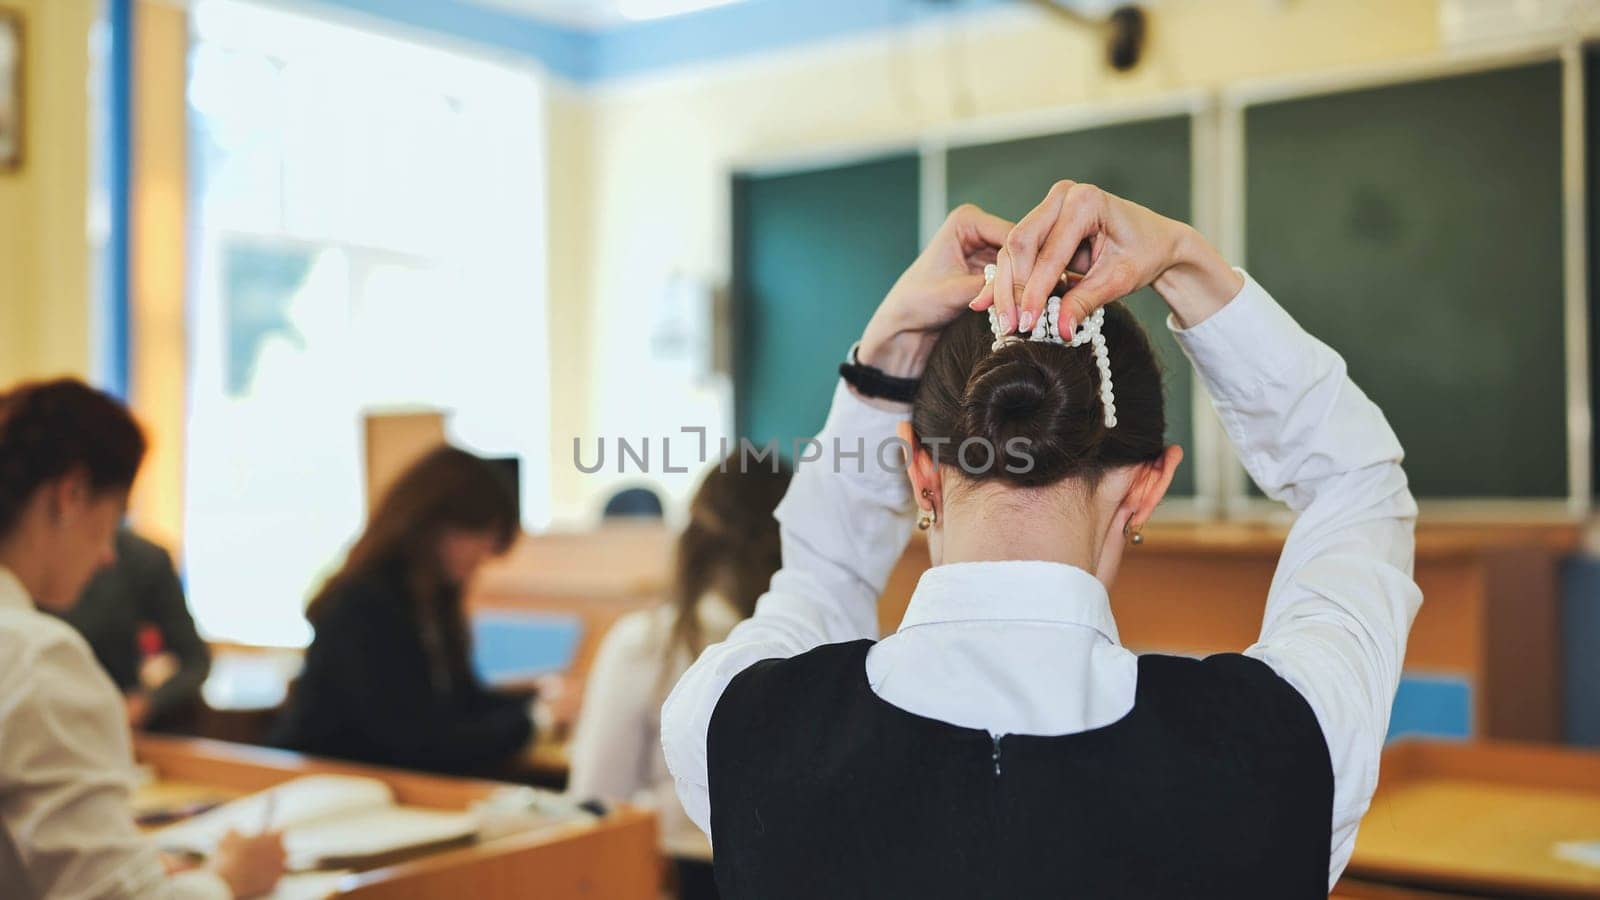 A schoolgirl fixes her hair during class. by DovidPro